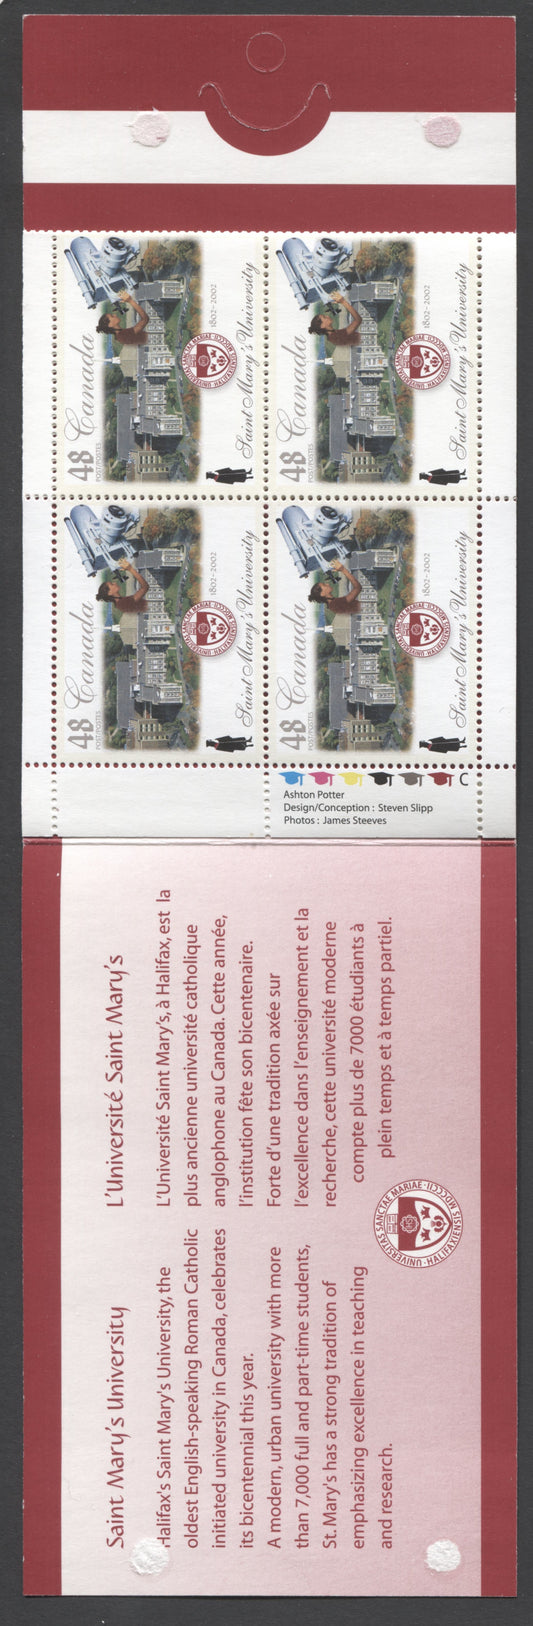 Canada #BK256a-b 2002 Trinity College Issue, Complete $3.84 Booklet, Tullis Russell Coatings Paper, Dead Paper, 4 mm GT-4 Tagging